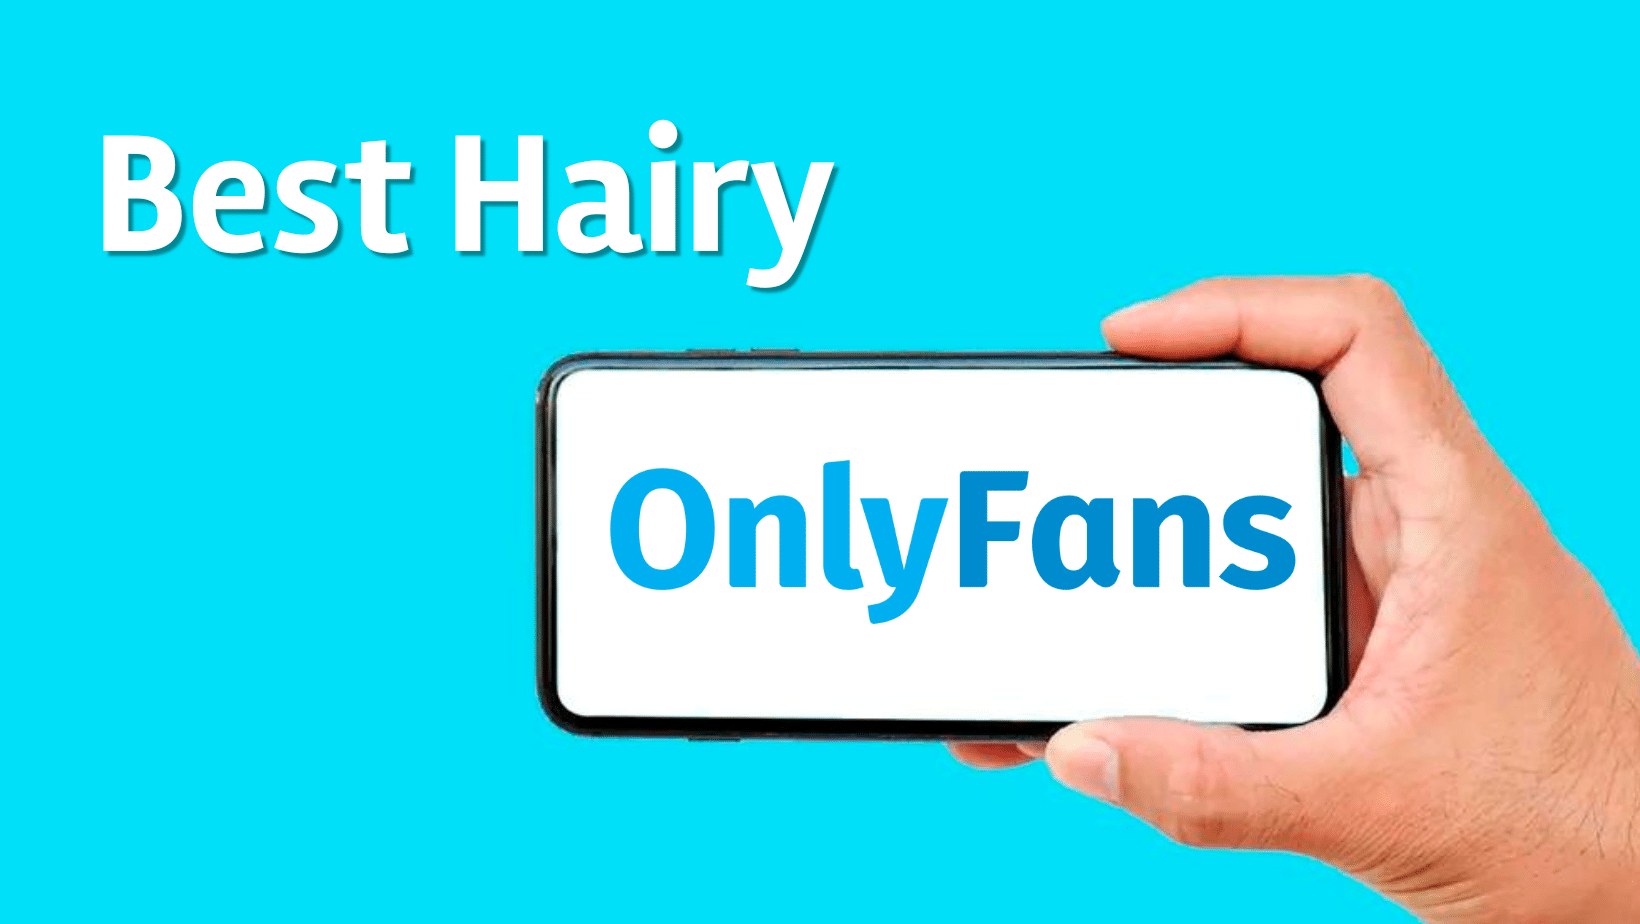 Best 13 Hairy Onlyfans Models to Follow